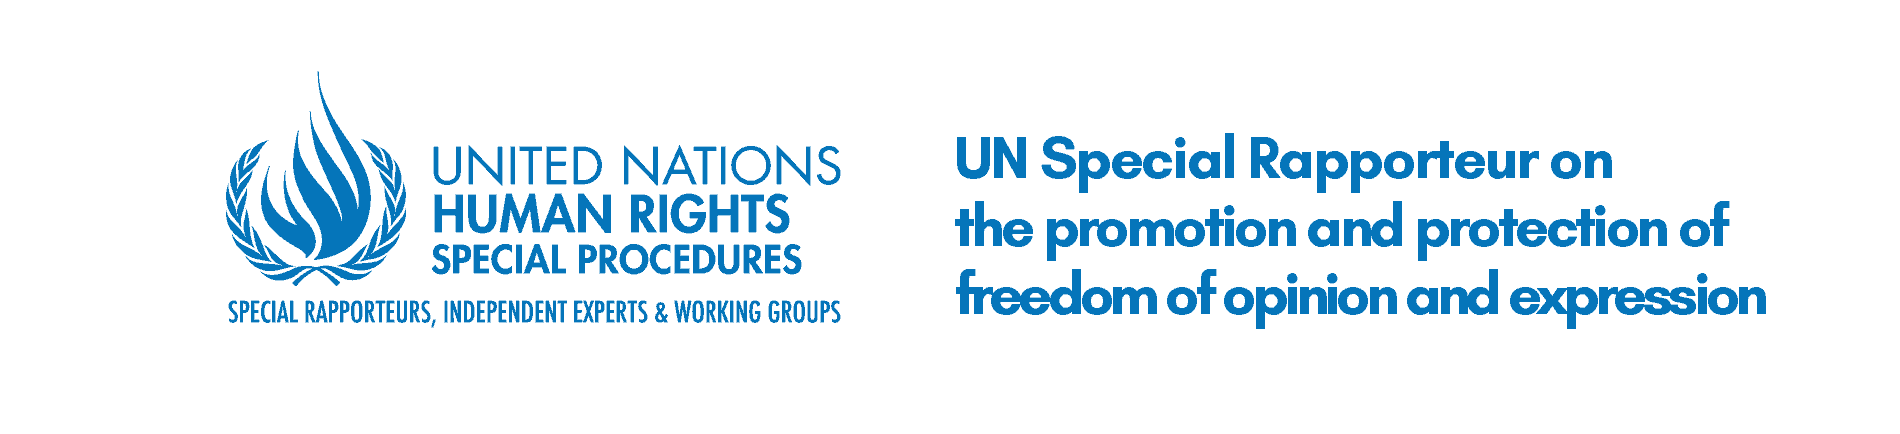 Special Rapporteur for Freedom of Expression and Opinion